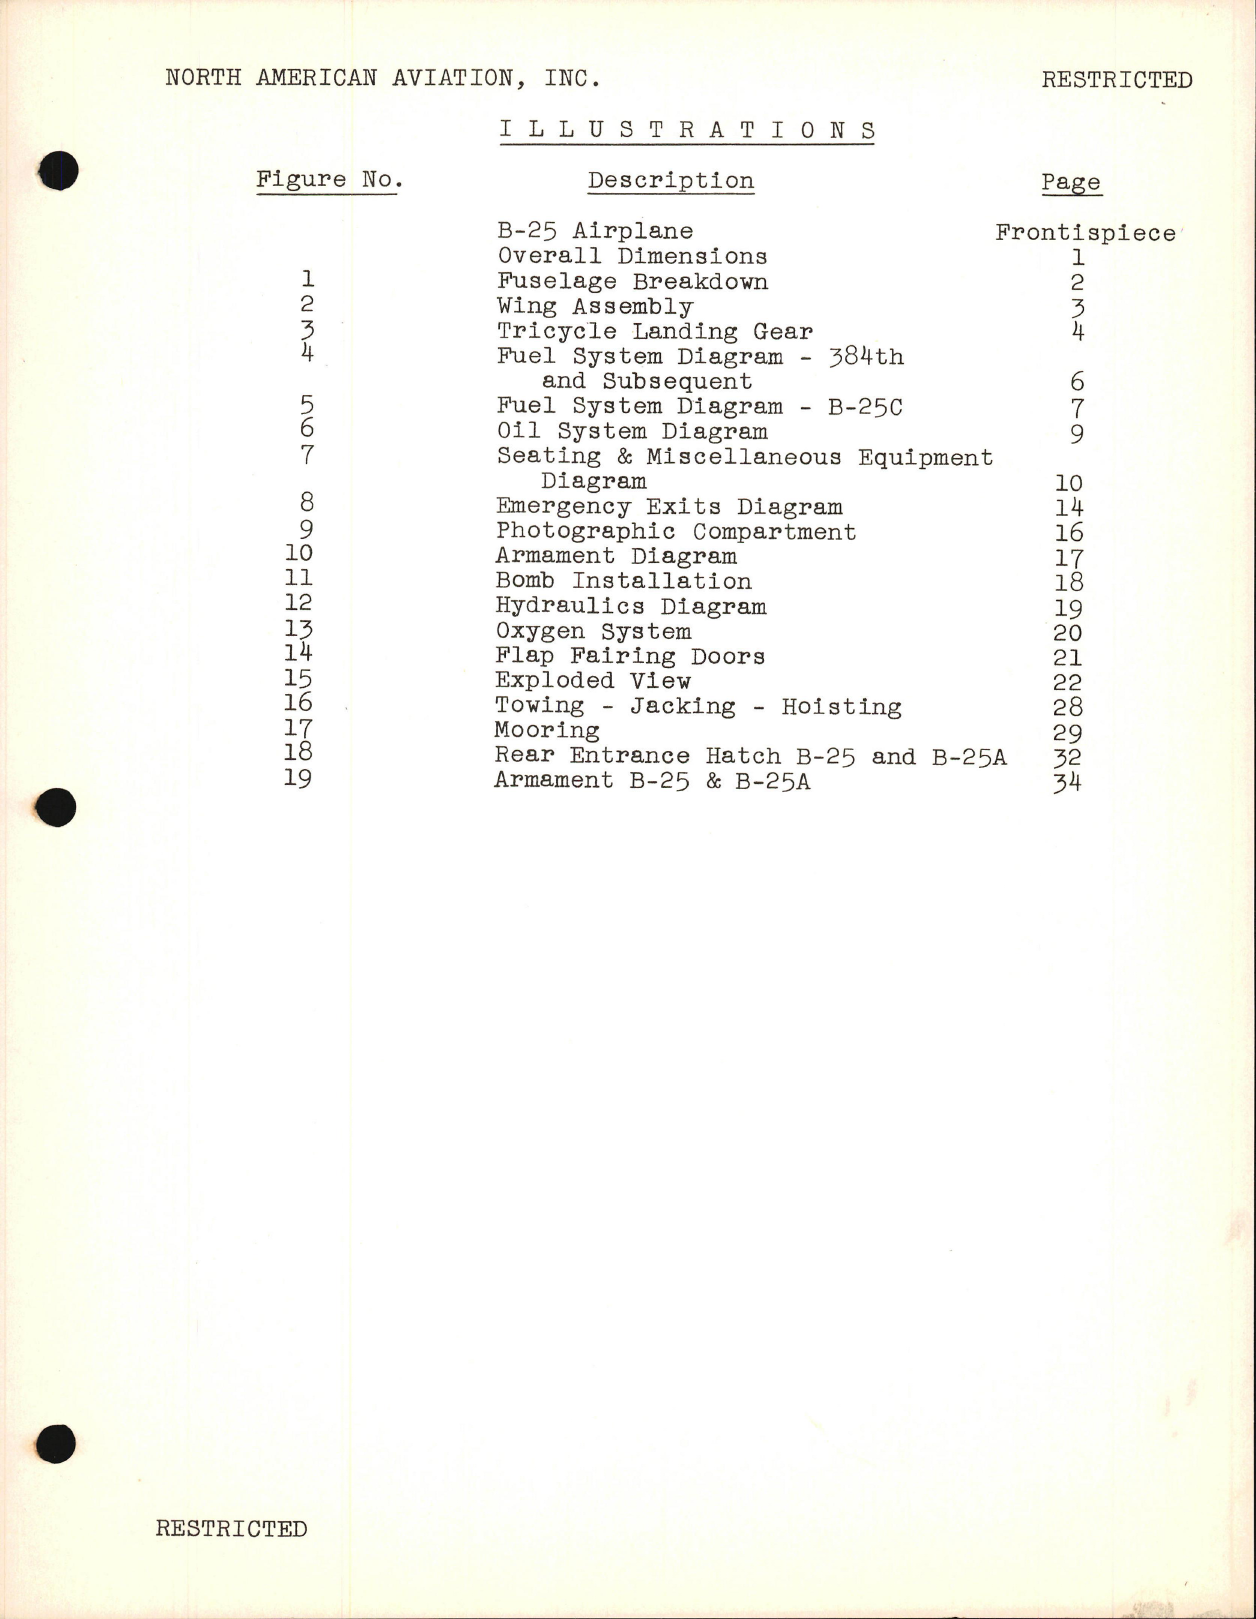 Sample page 5 from AirCorps Library document: Service School Lectures - General Airplane